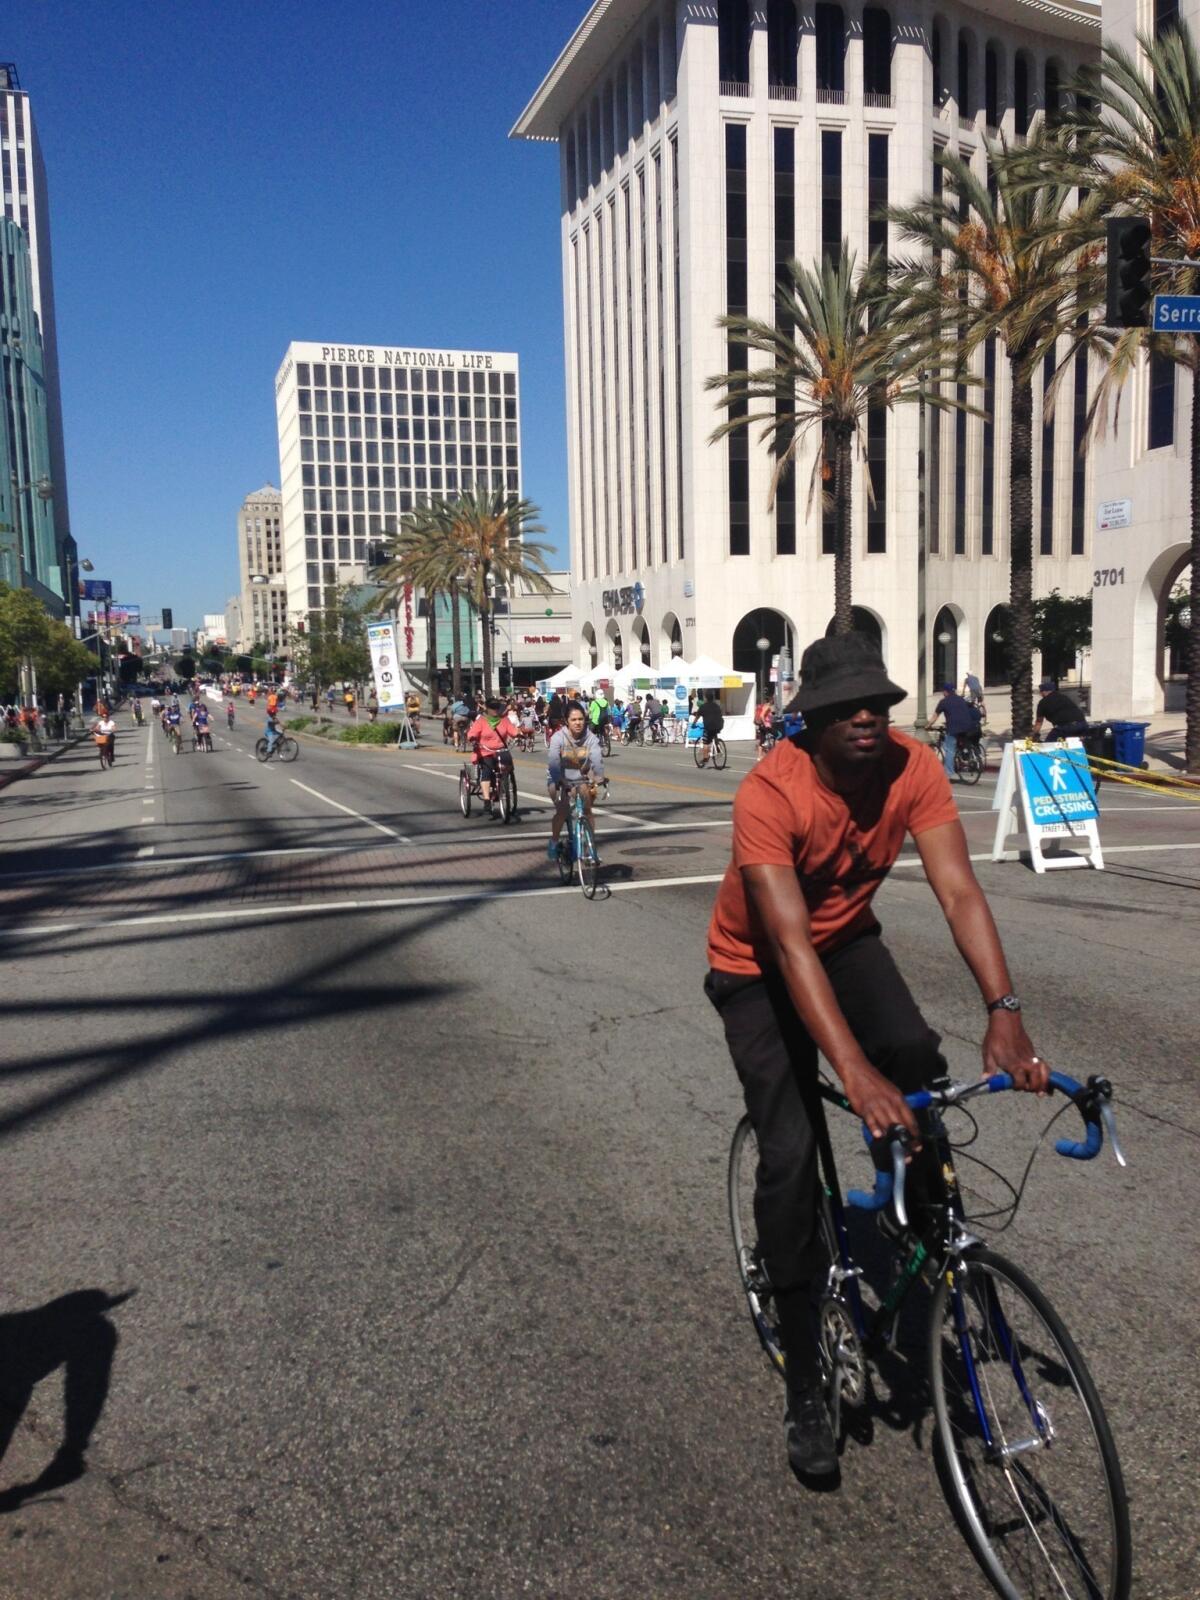 Cyclists make their way down Wilshire Boulevard in Koreatown.